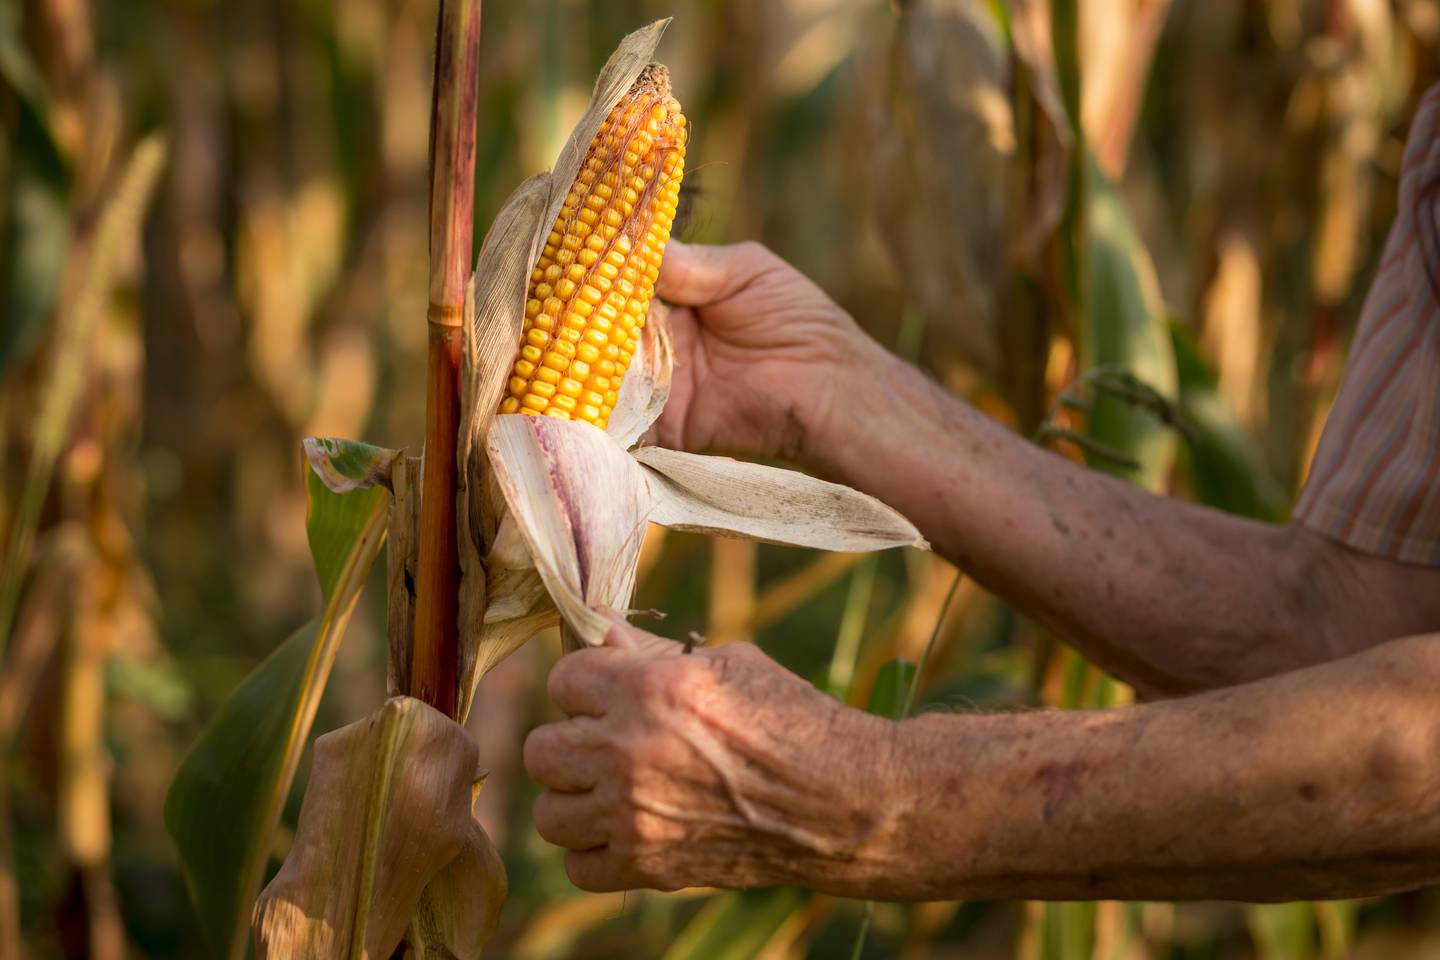 Last year, 142,975 hectares of GM corn was planted, a year-on-year increase of 31%.dfd